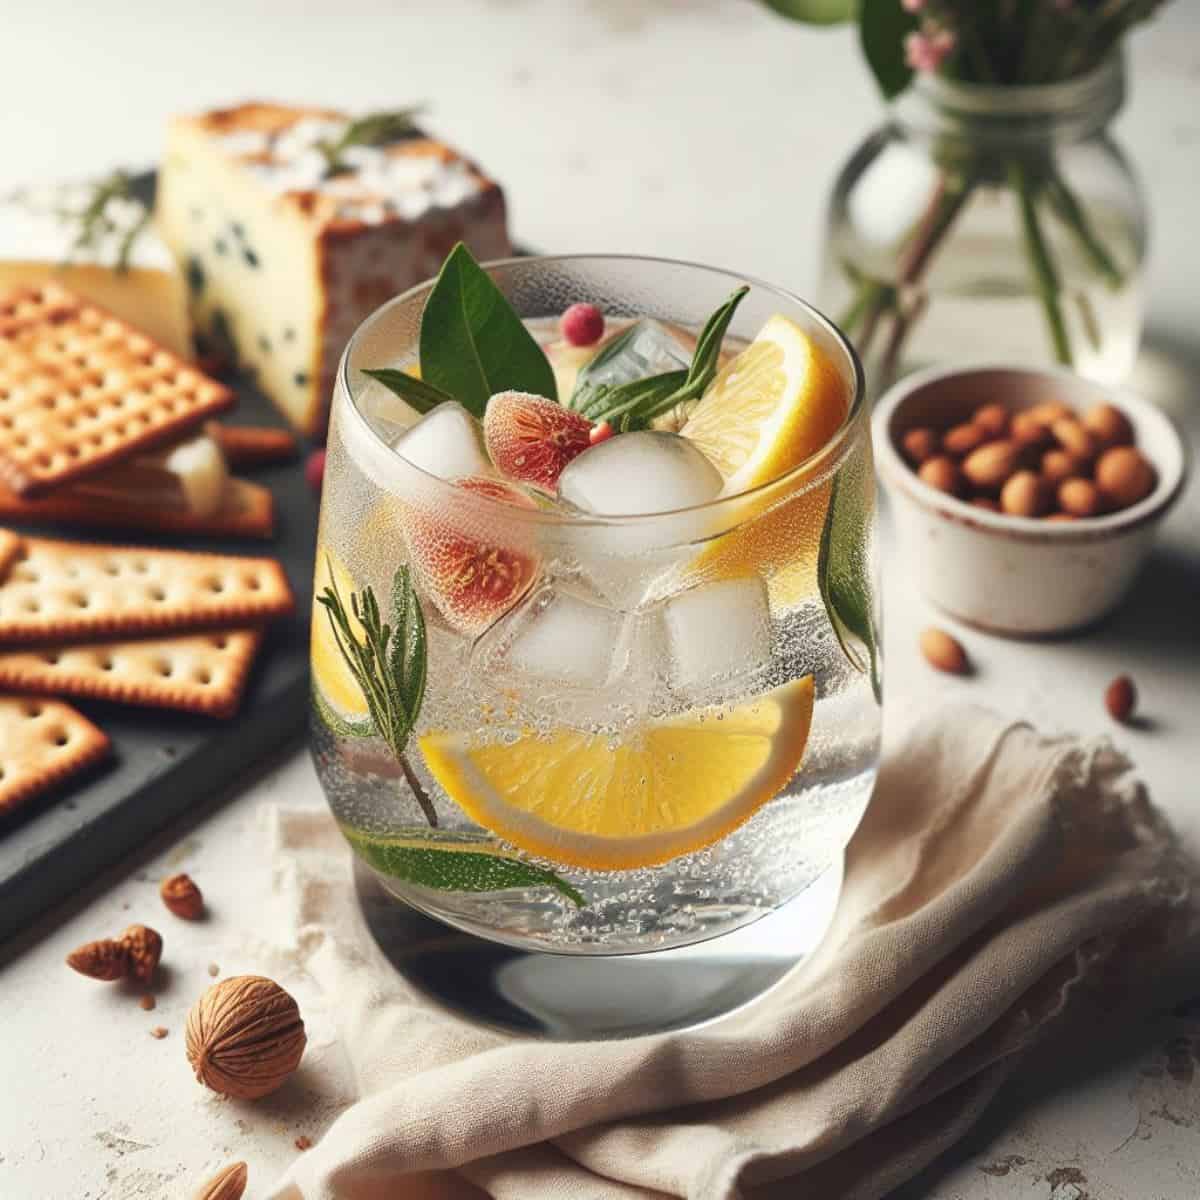 cocktail with vermouth, orange slices, ice cubes and with cookies and cheese in the background